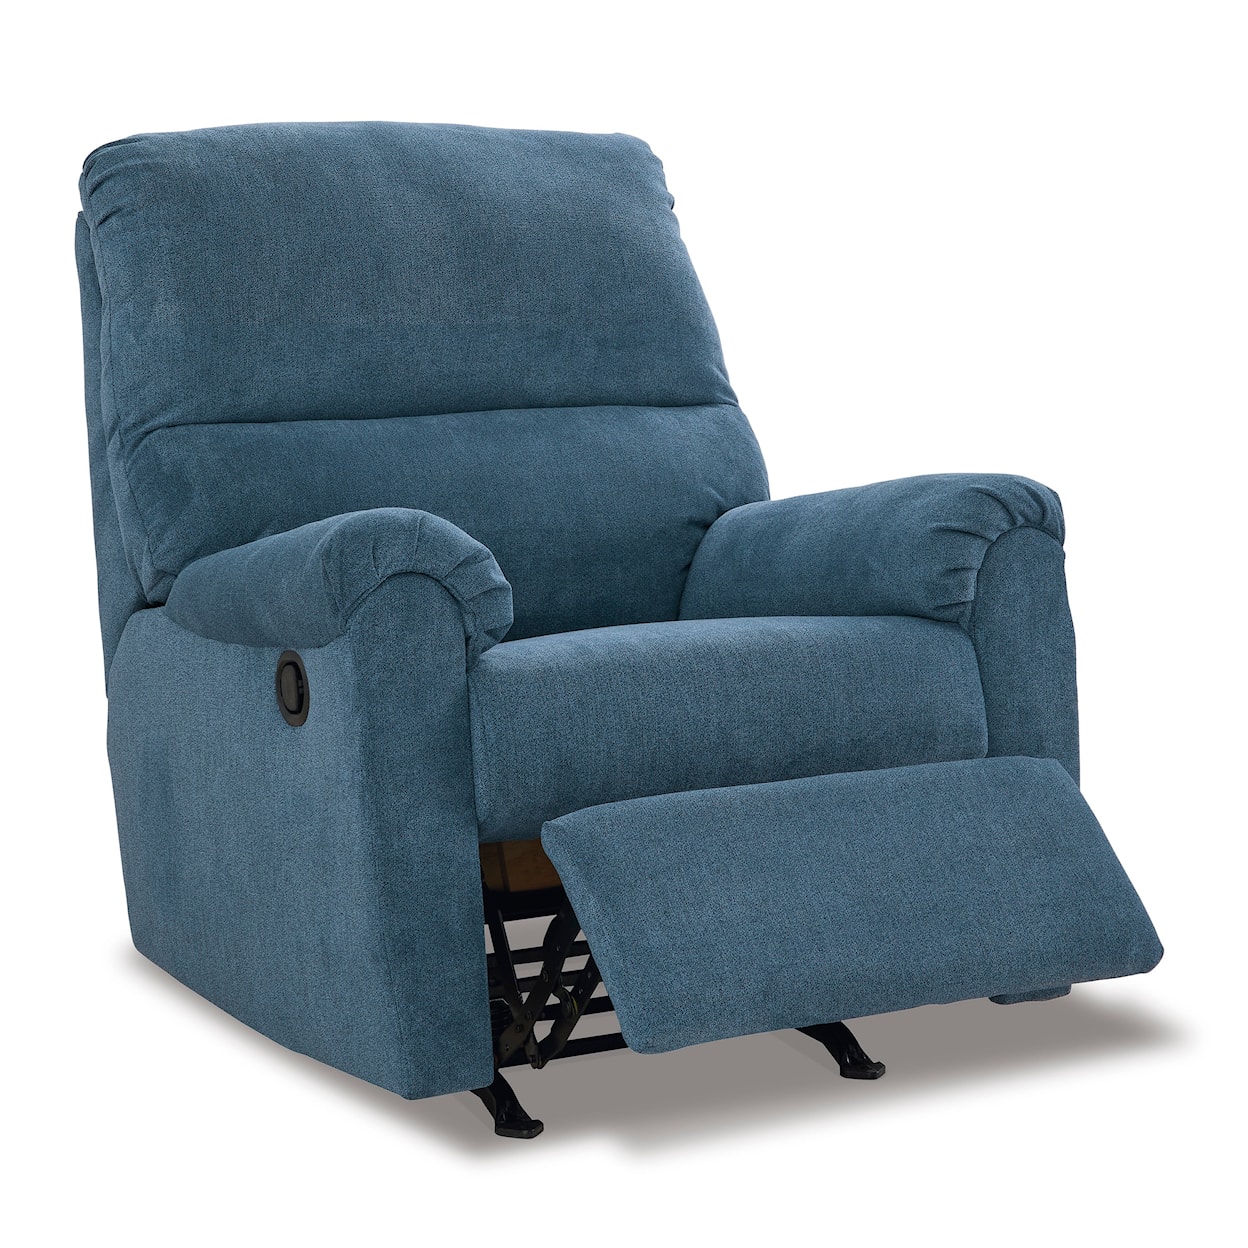 Signature Design by Ashley Miravel Recliner